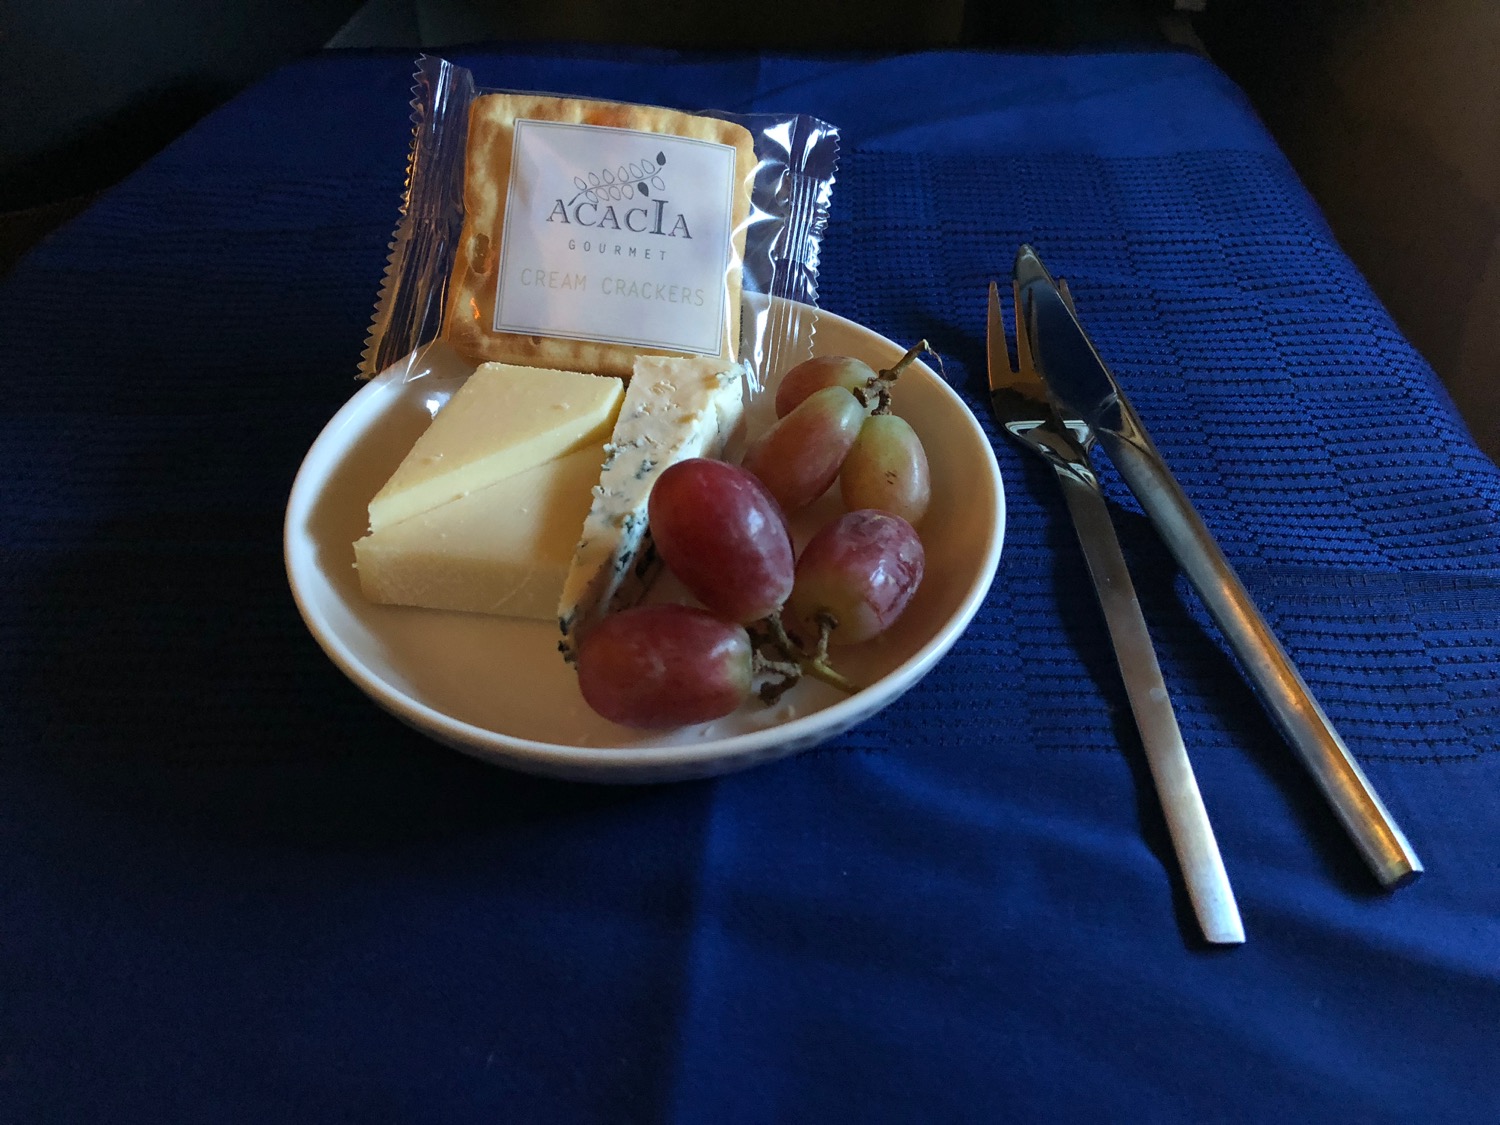 a plate of food with grapes and crackers